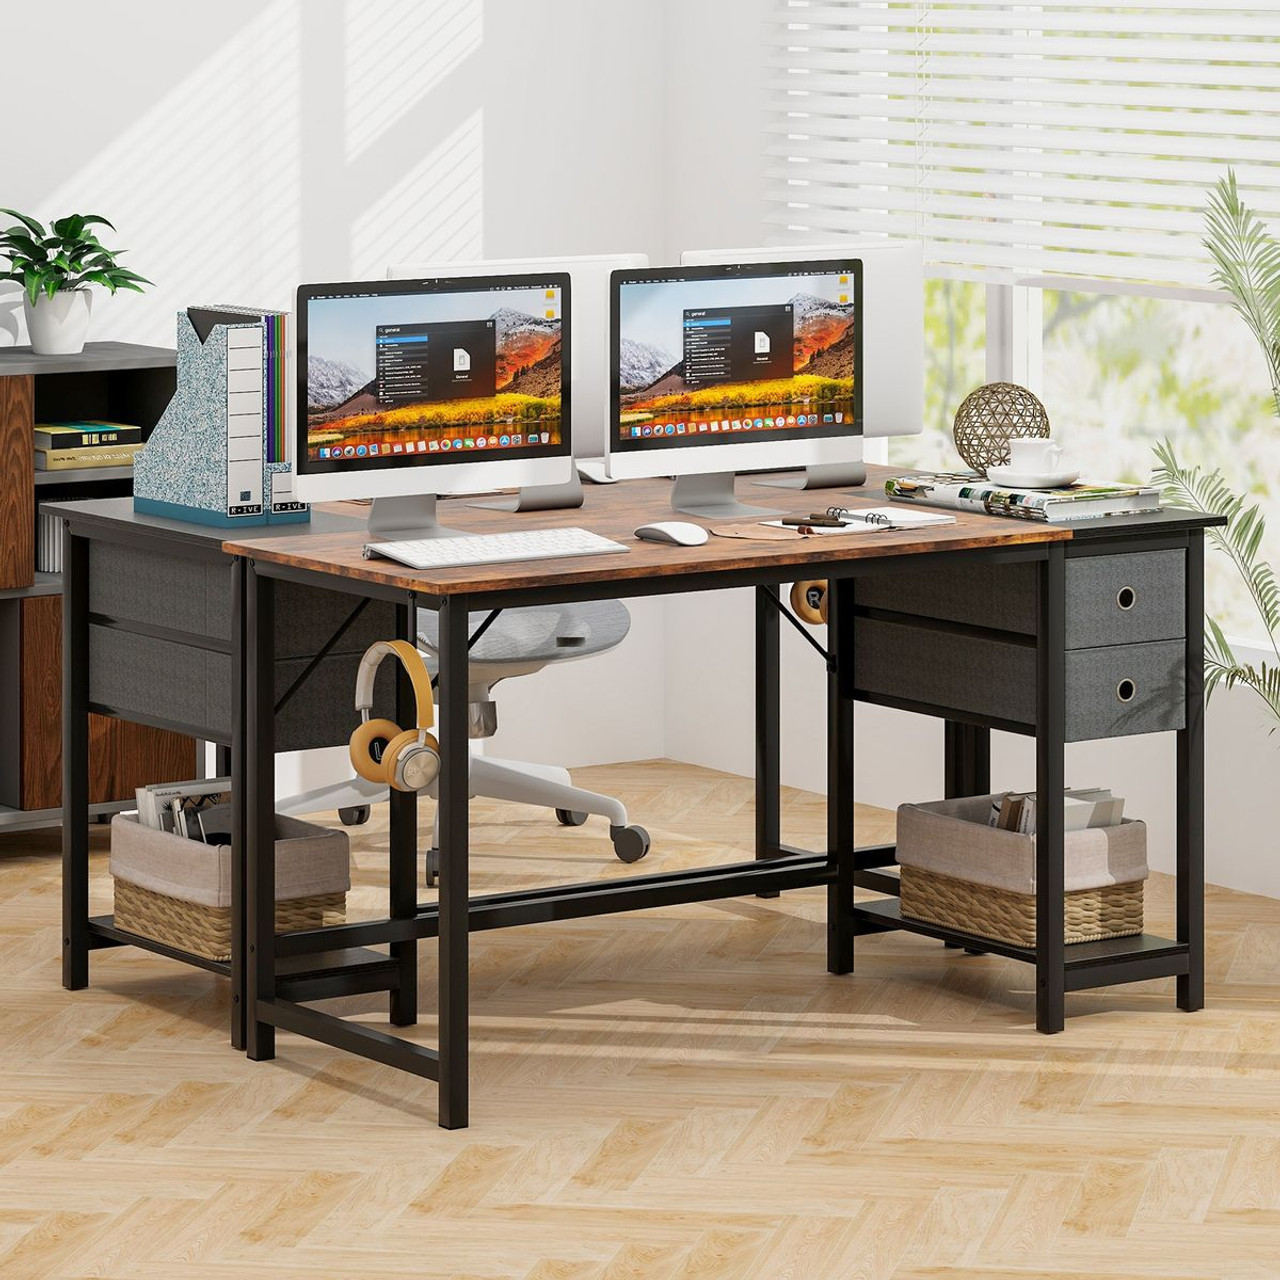 55-Inch Home Office Desk with 2 Drawers & Hanging Hook product image